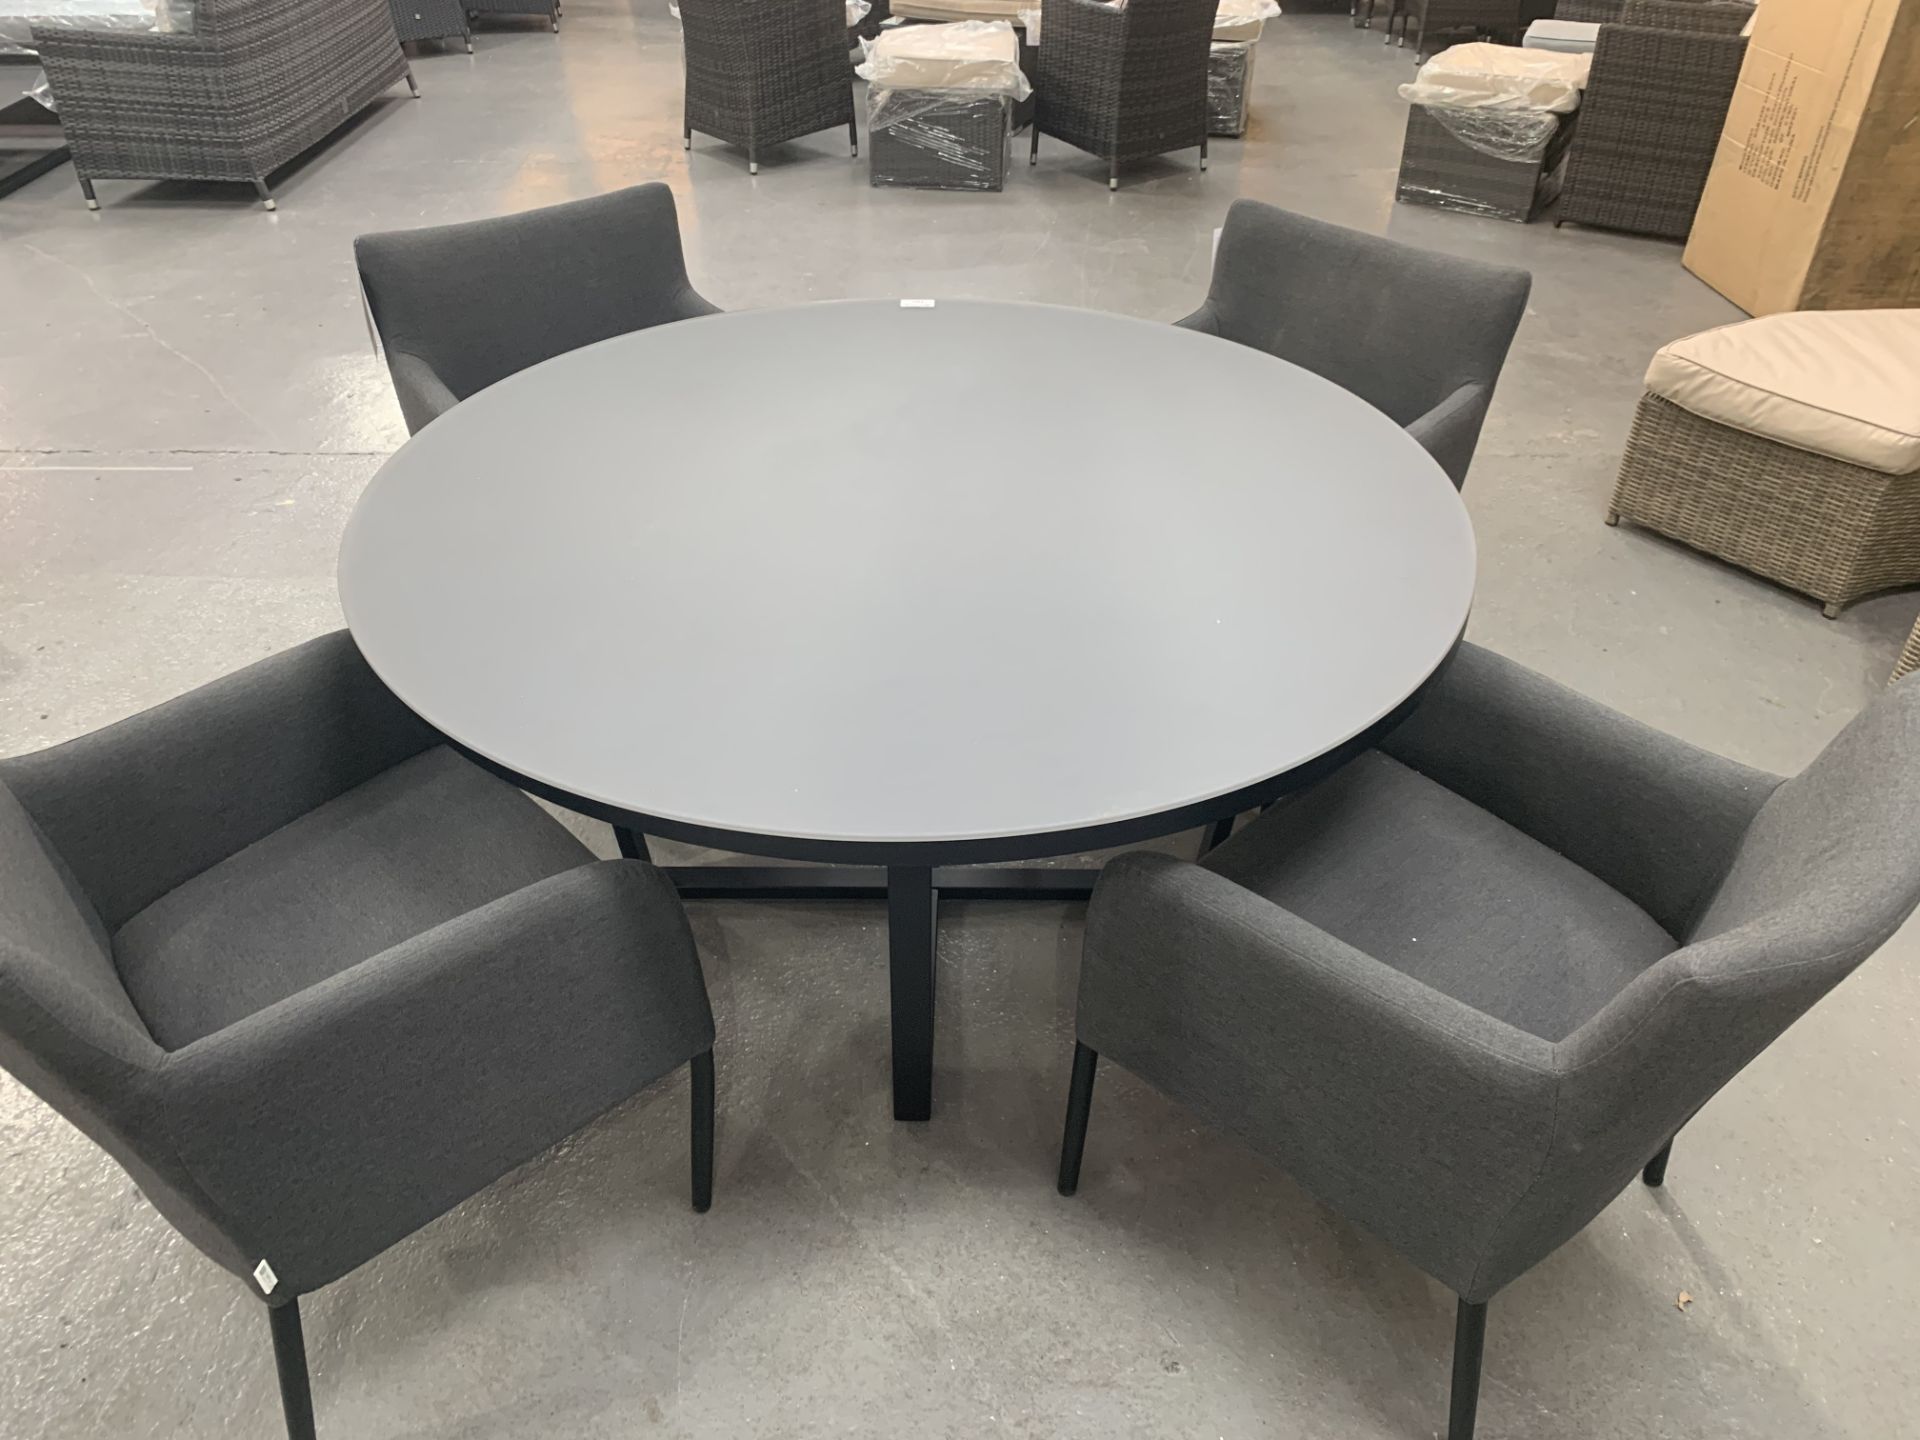 Maze Lounge Sunbrella Grey dining table with 4 matching tub chairs